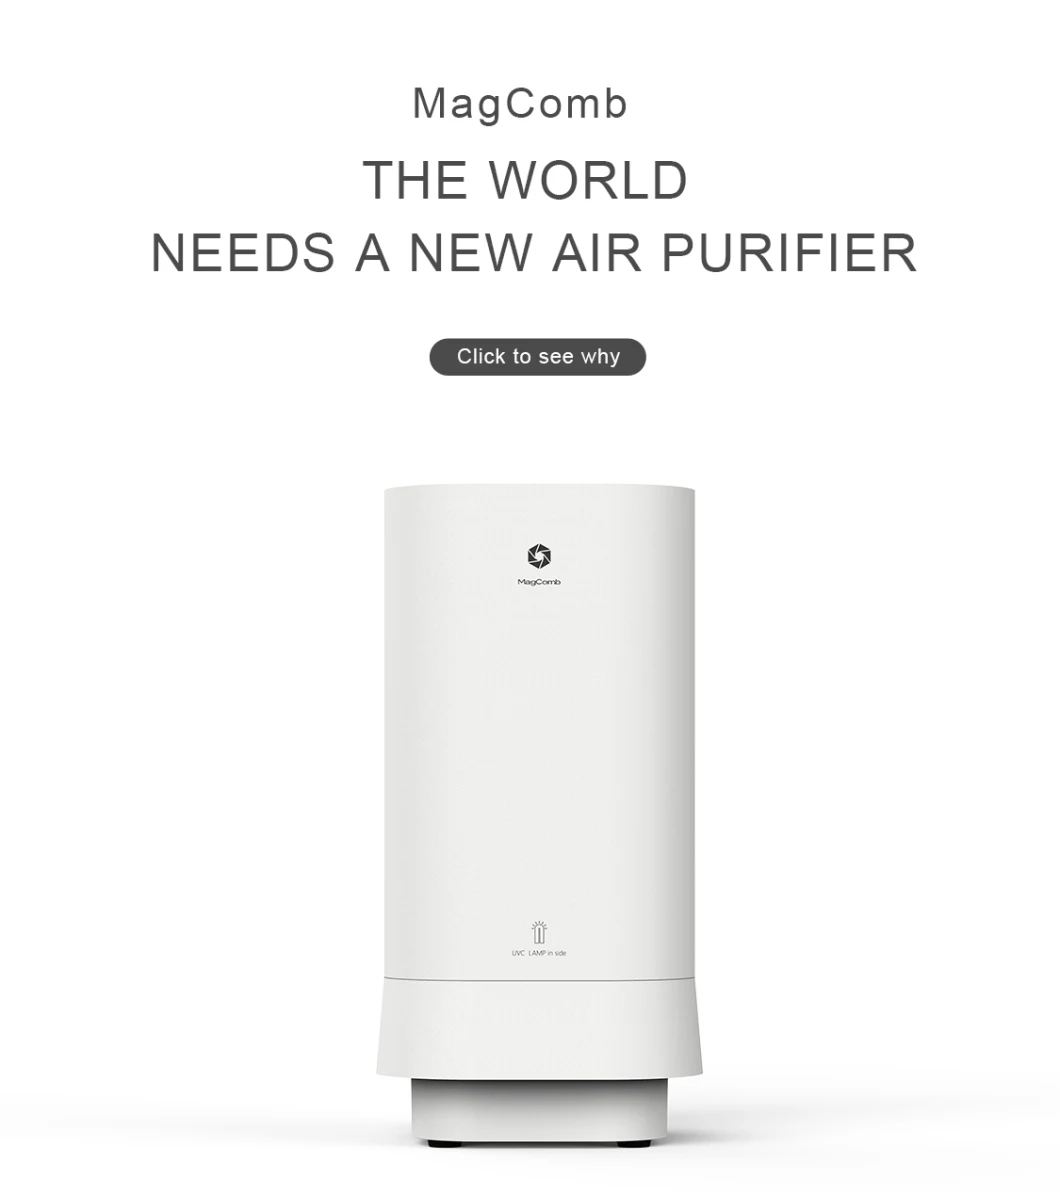 Price for Air Purifier, Air Purifier Price, UVC Air Purifier Price, HEPA Air Purifier Price